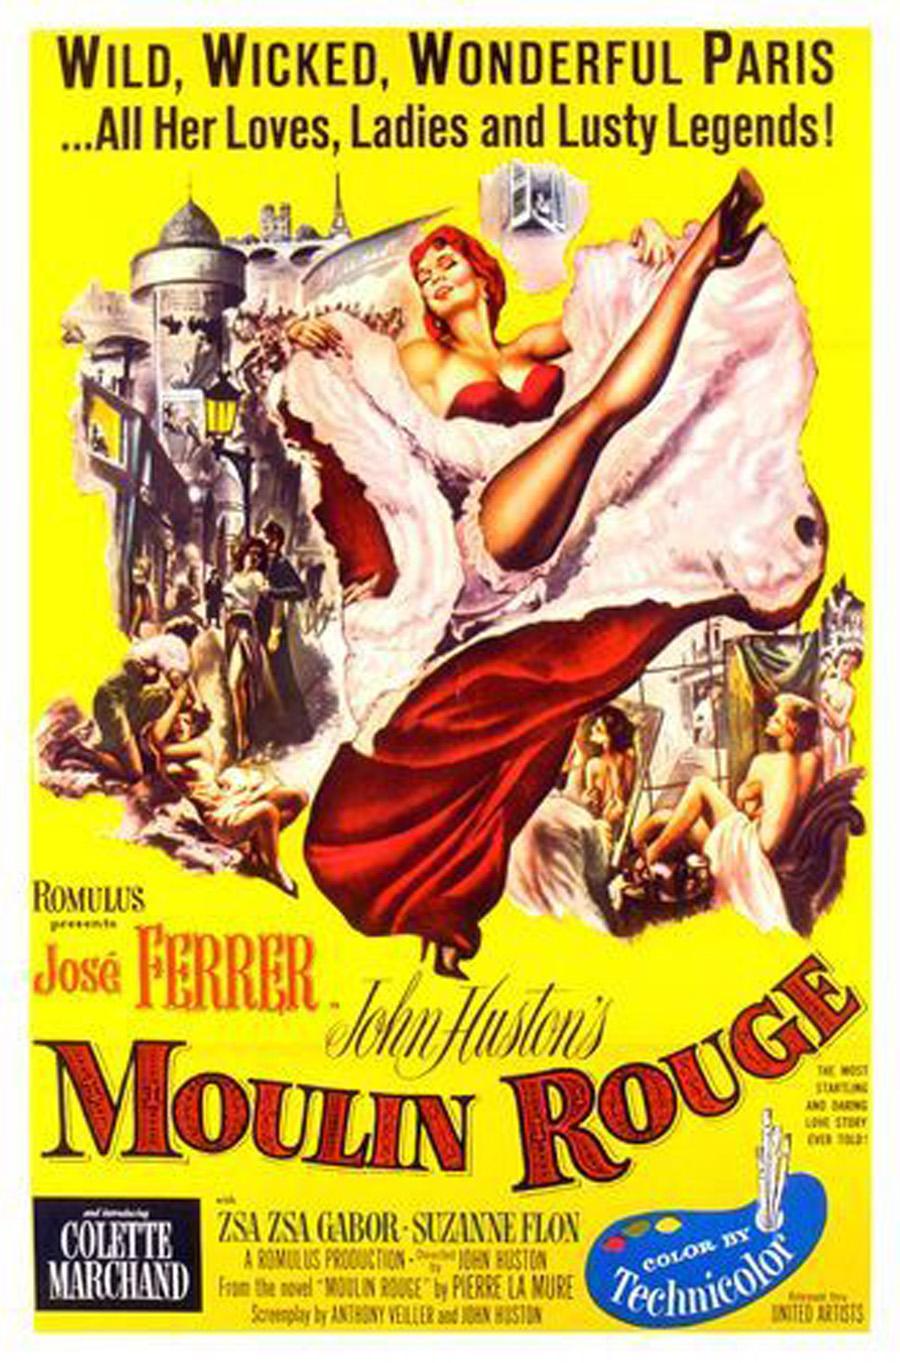 image for 2017-02-16-film-screening-moulin-rouge-1952